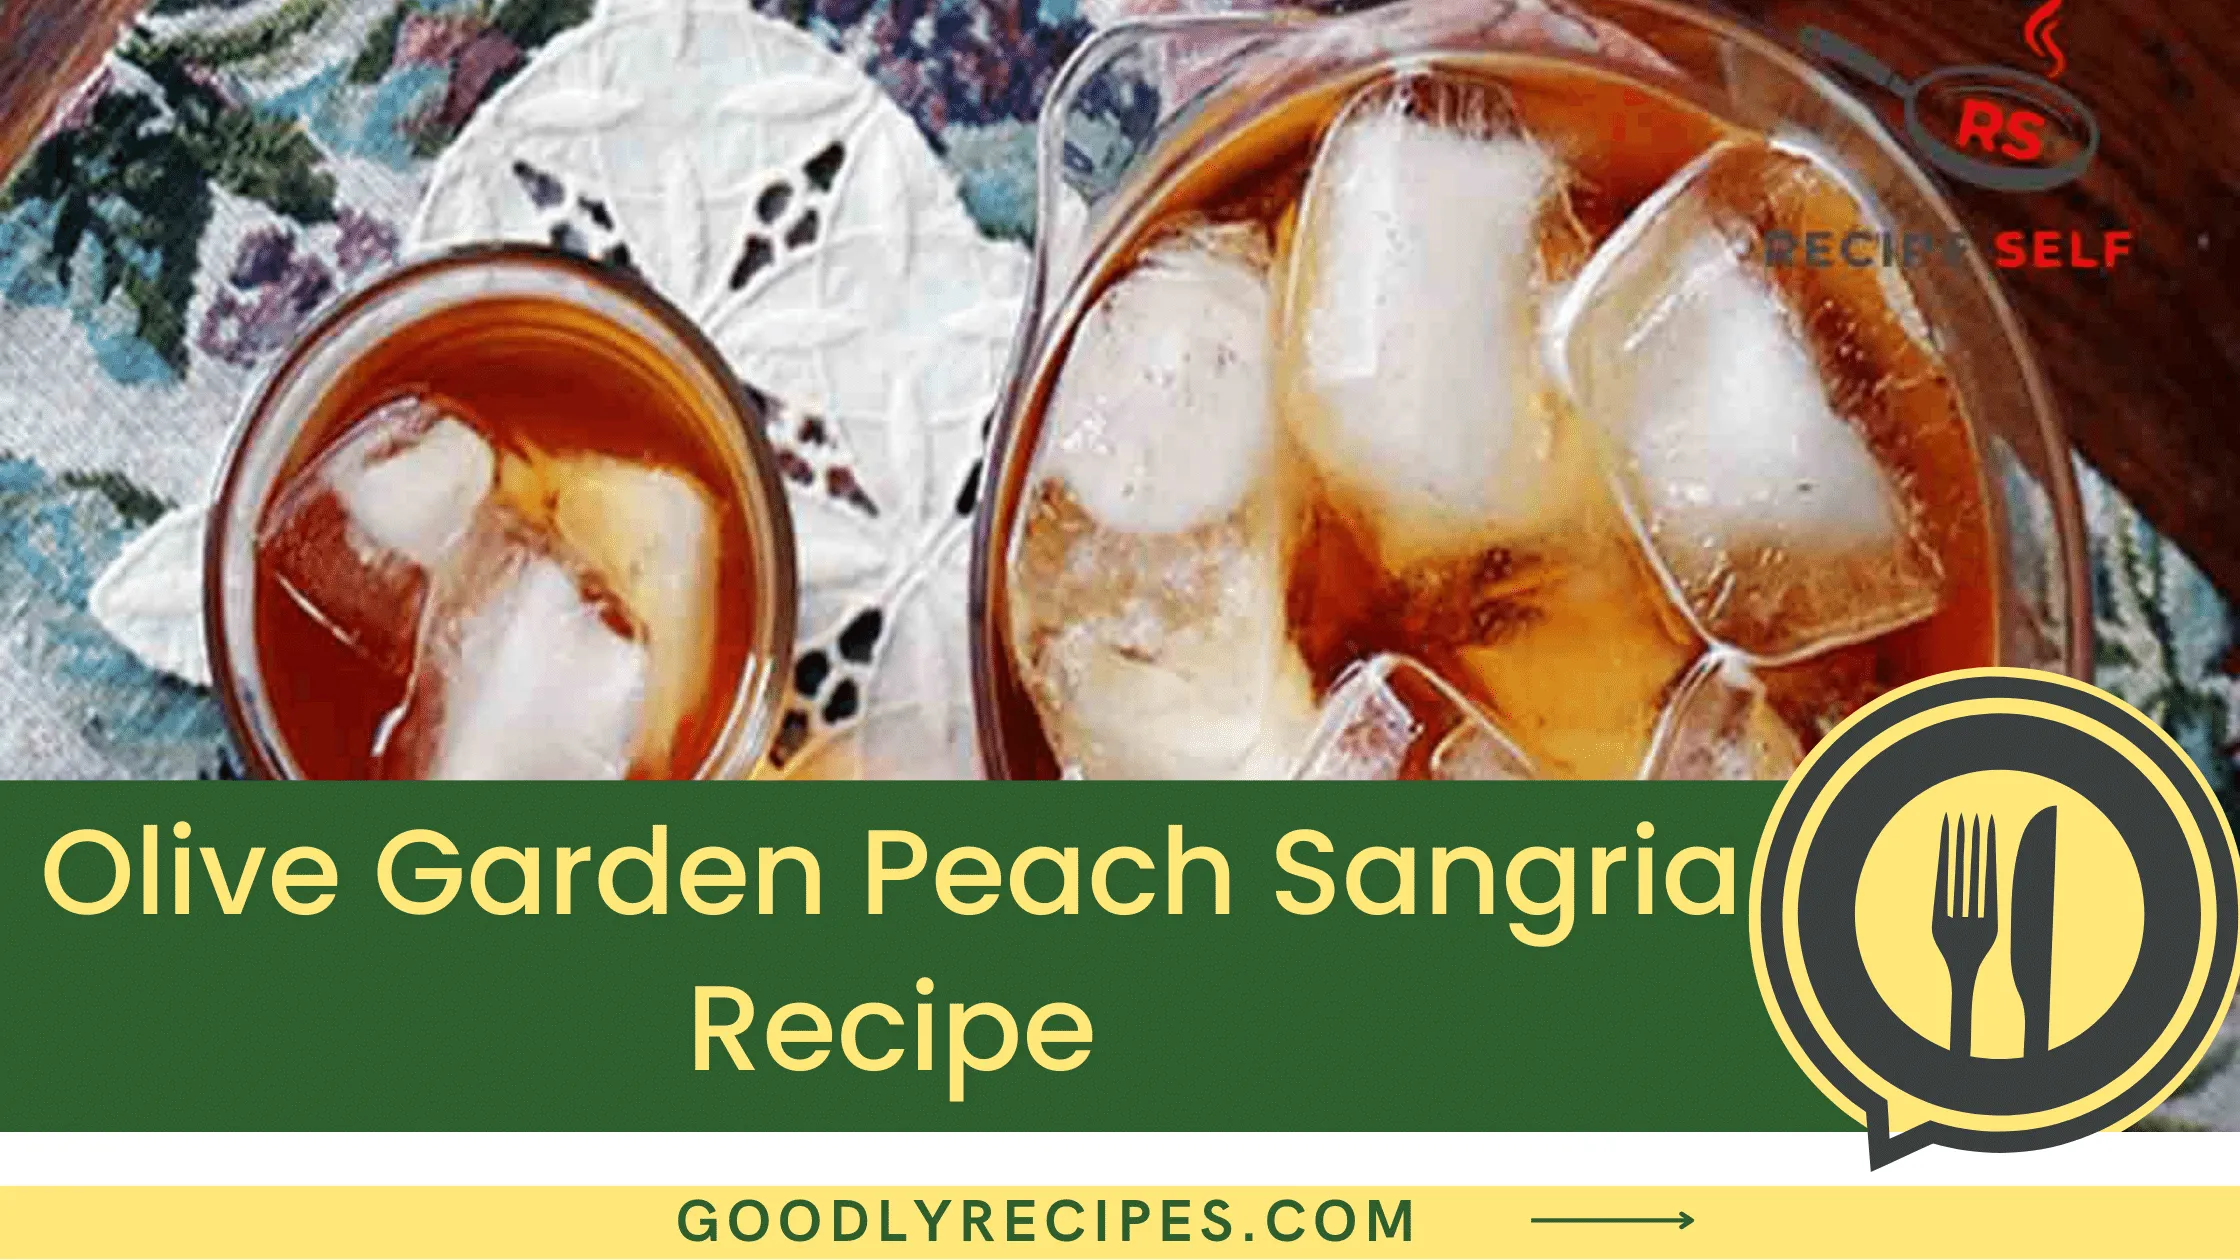 What Is Olive Garden Peach Sangria?